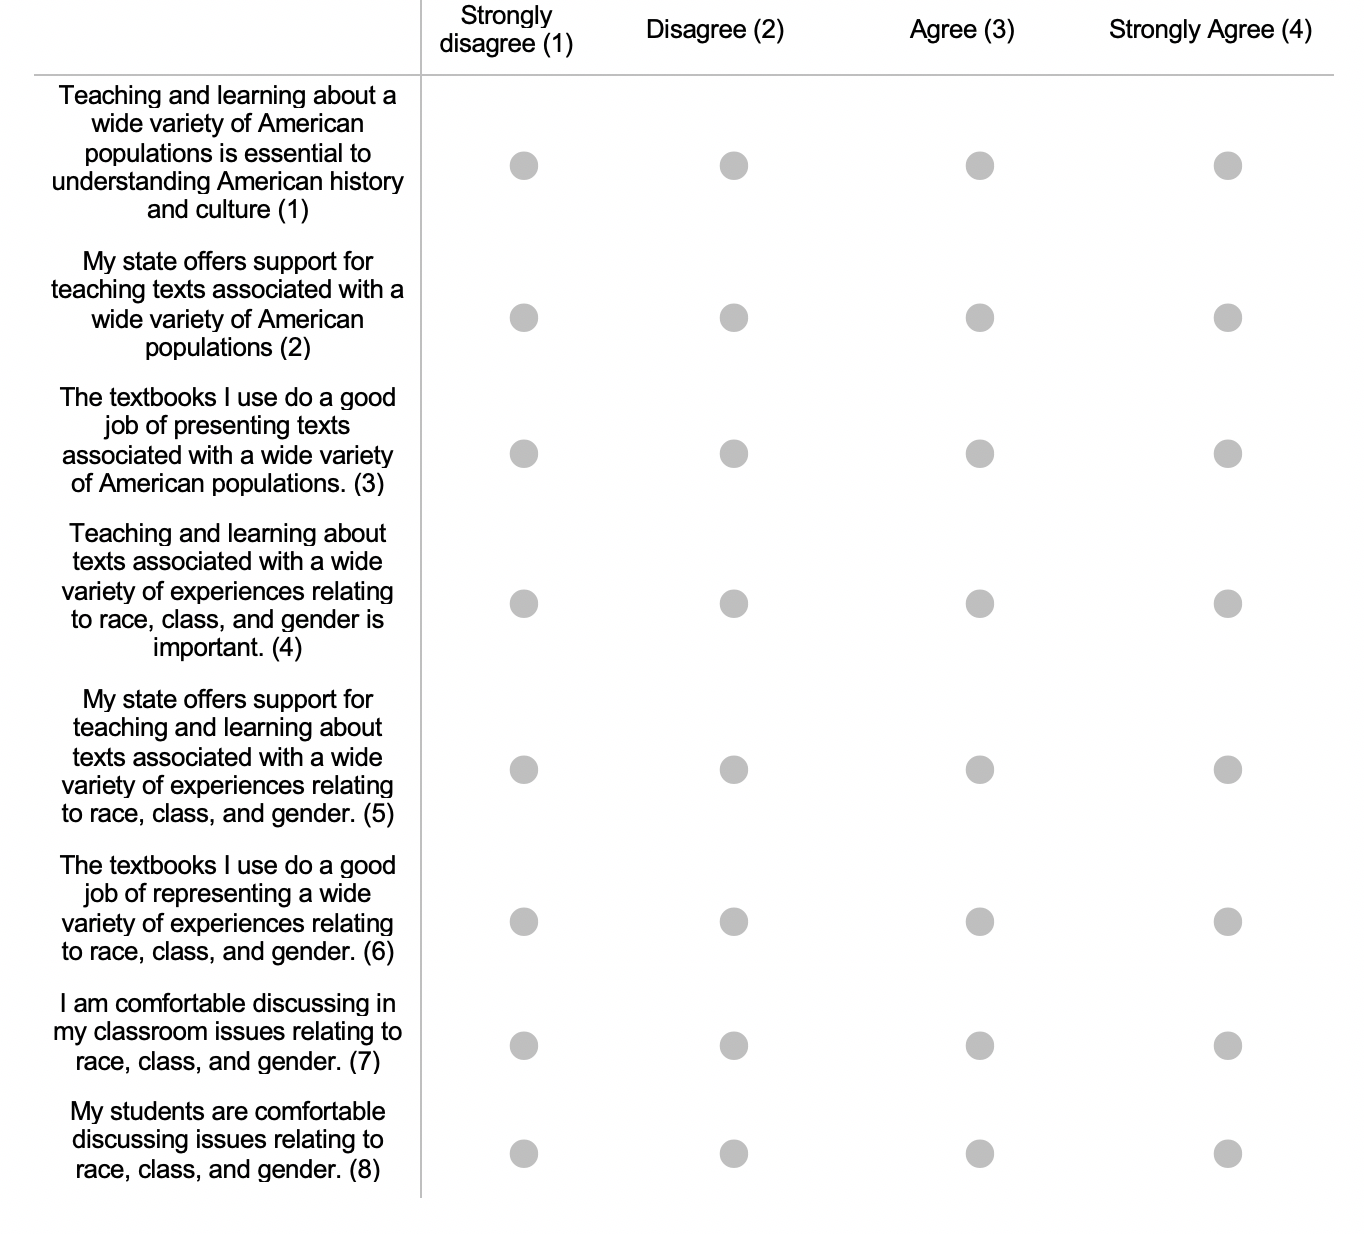 table asking for views about teaching diverse literatures